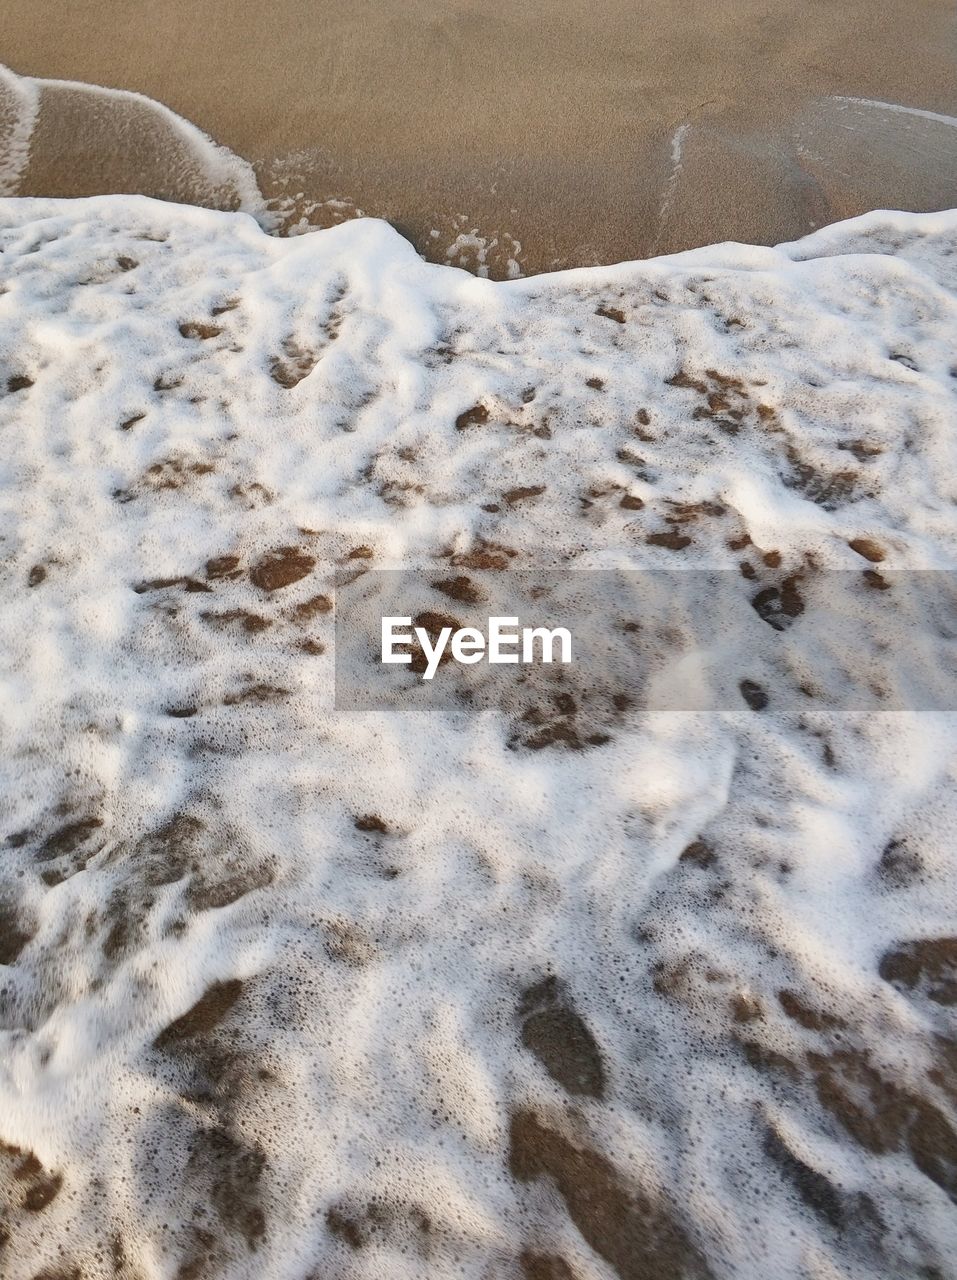 HIGH ANGLE VIEW OF BUBBLES ON BEACH